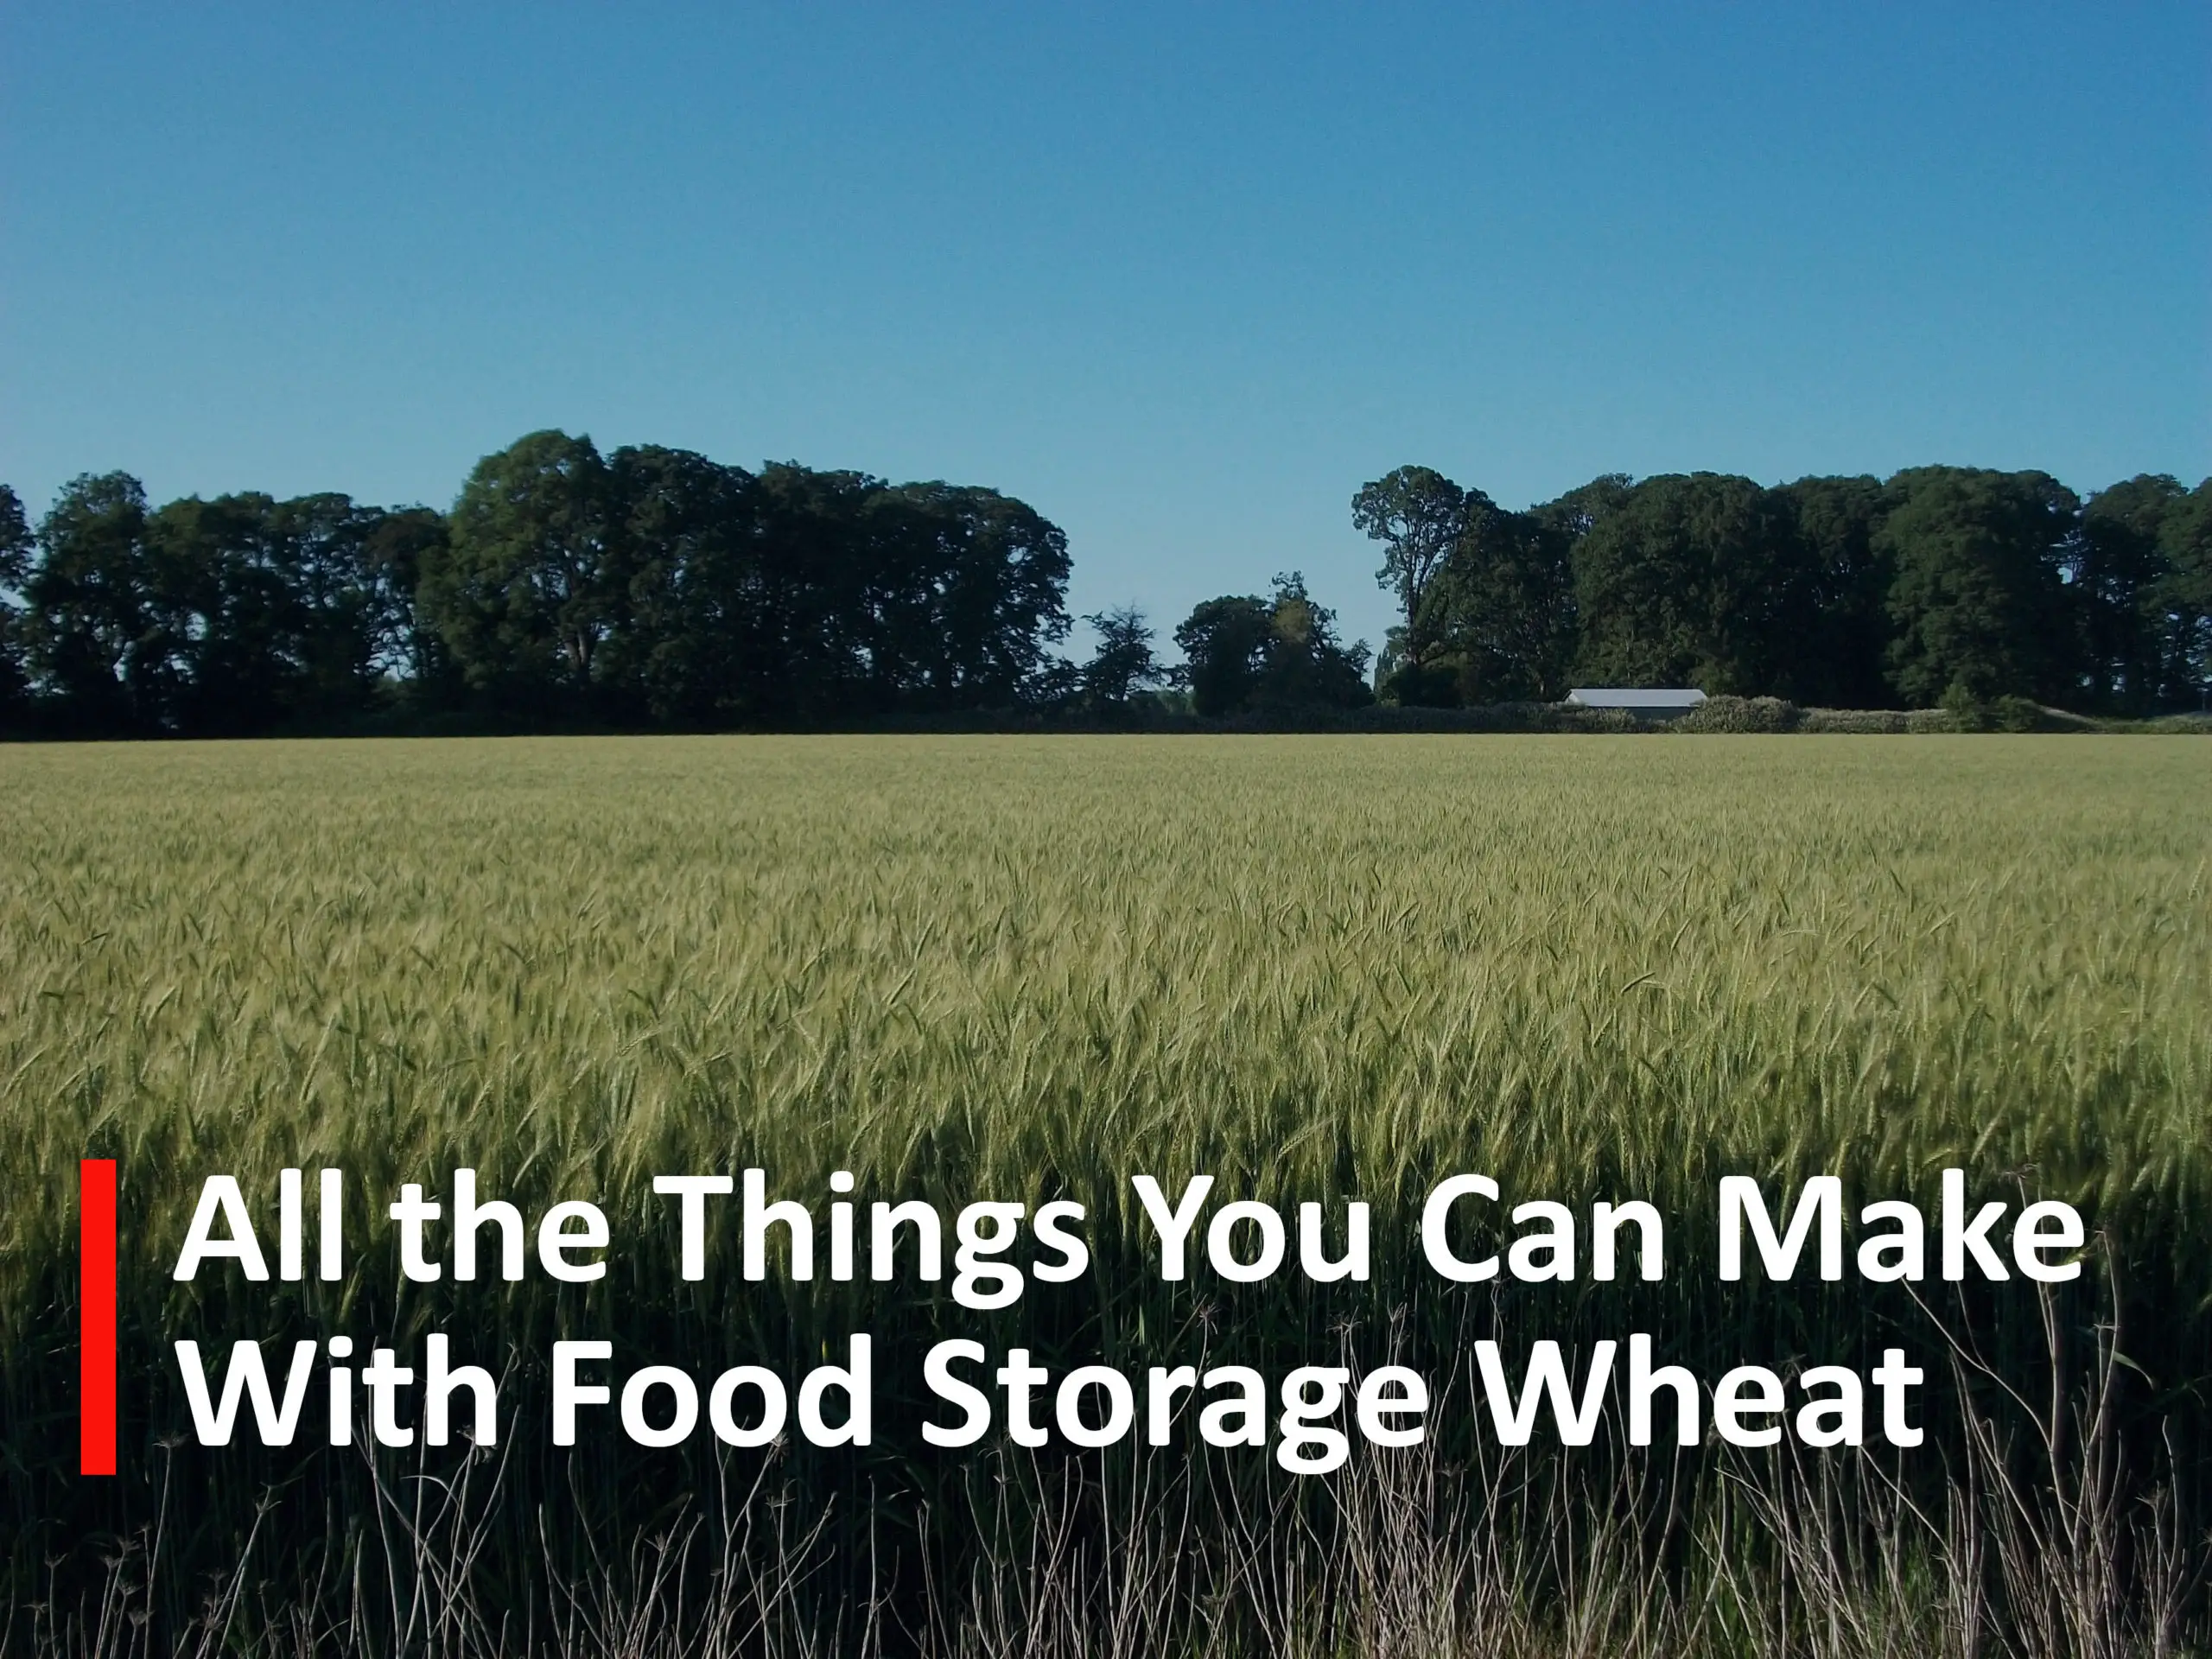 All the things you can make with food storage wheat